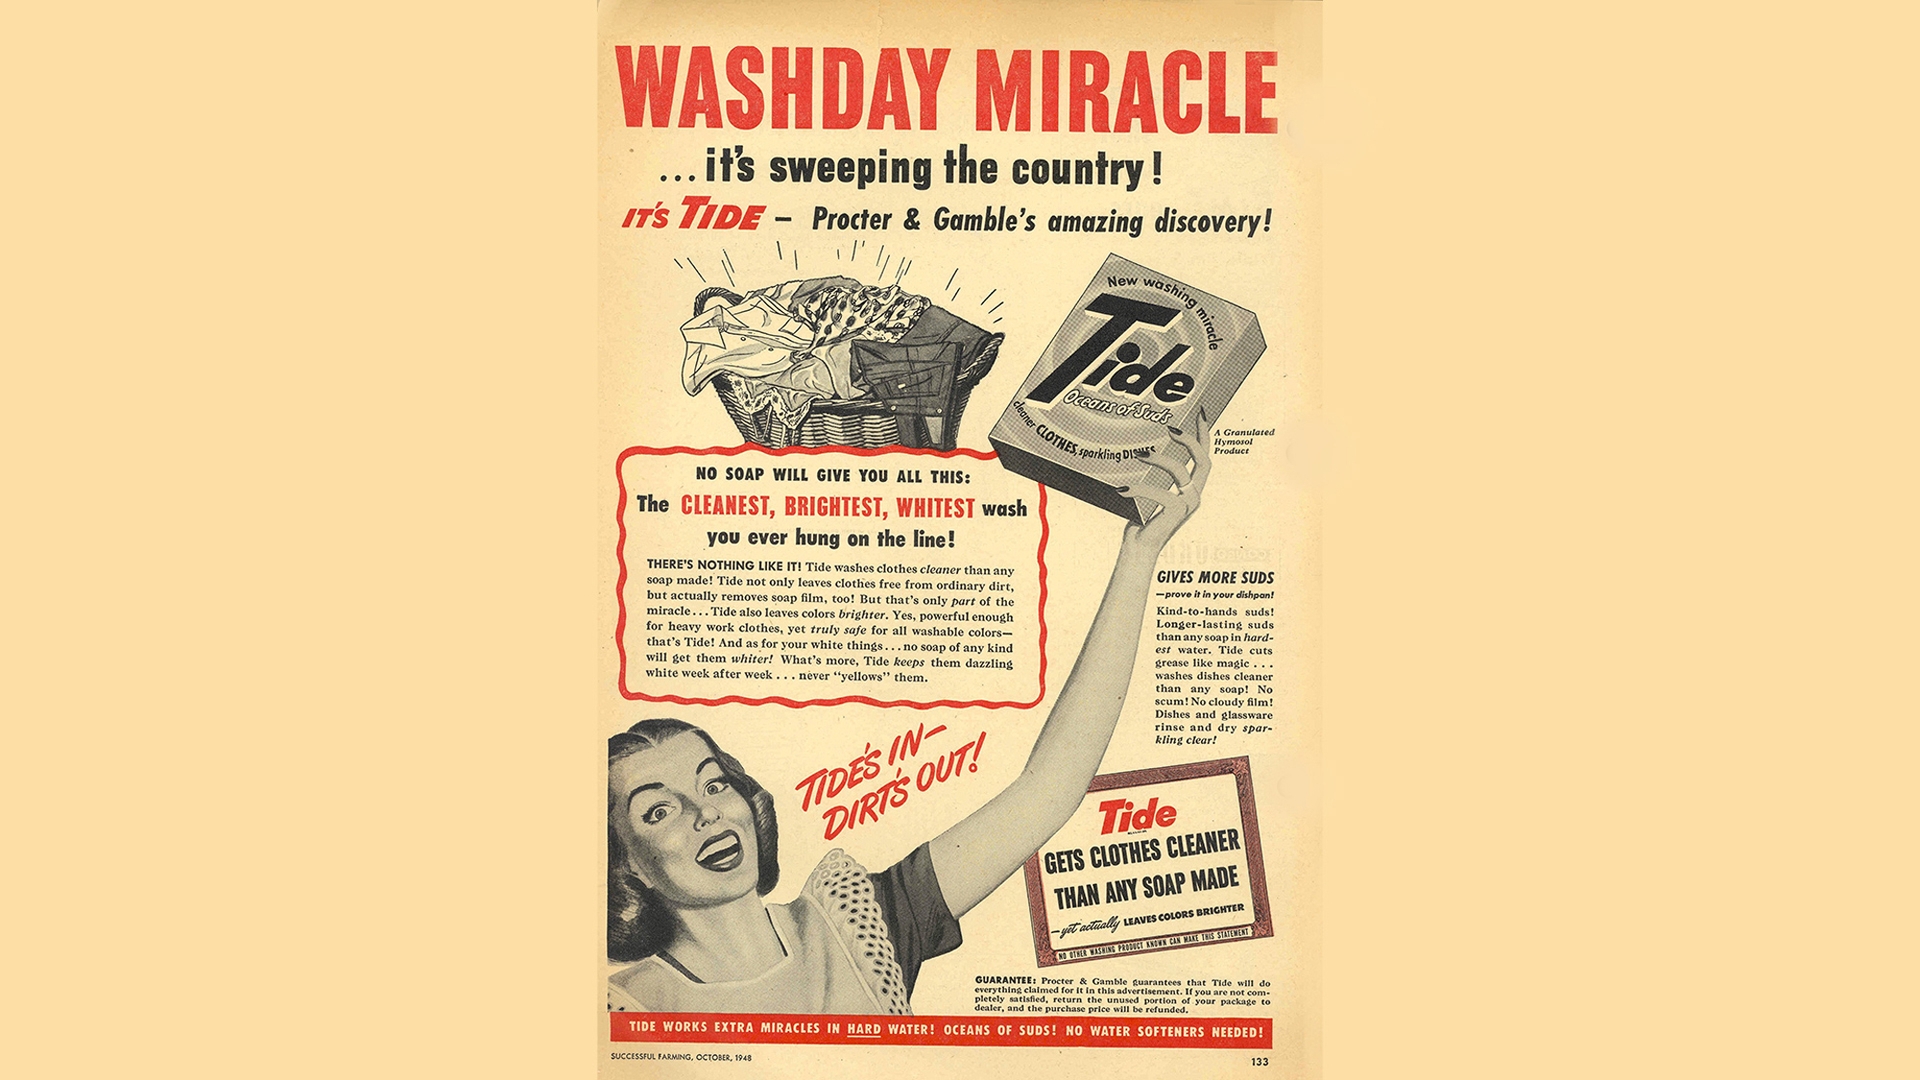 Vintage print advertisement for Tide laundry detergent. The ad shows a woman holding a box of Tide aloft. The text at the top of the ad says "washday miracle" in all-capital letters.